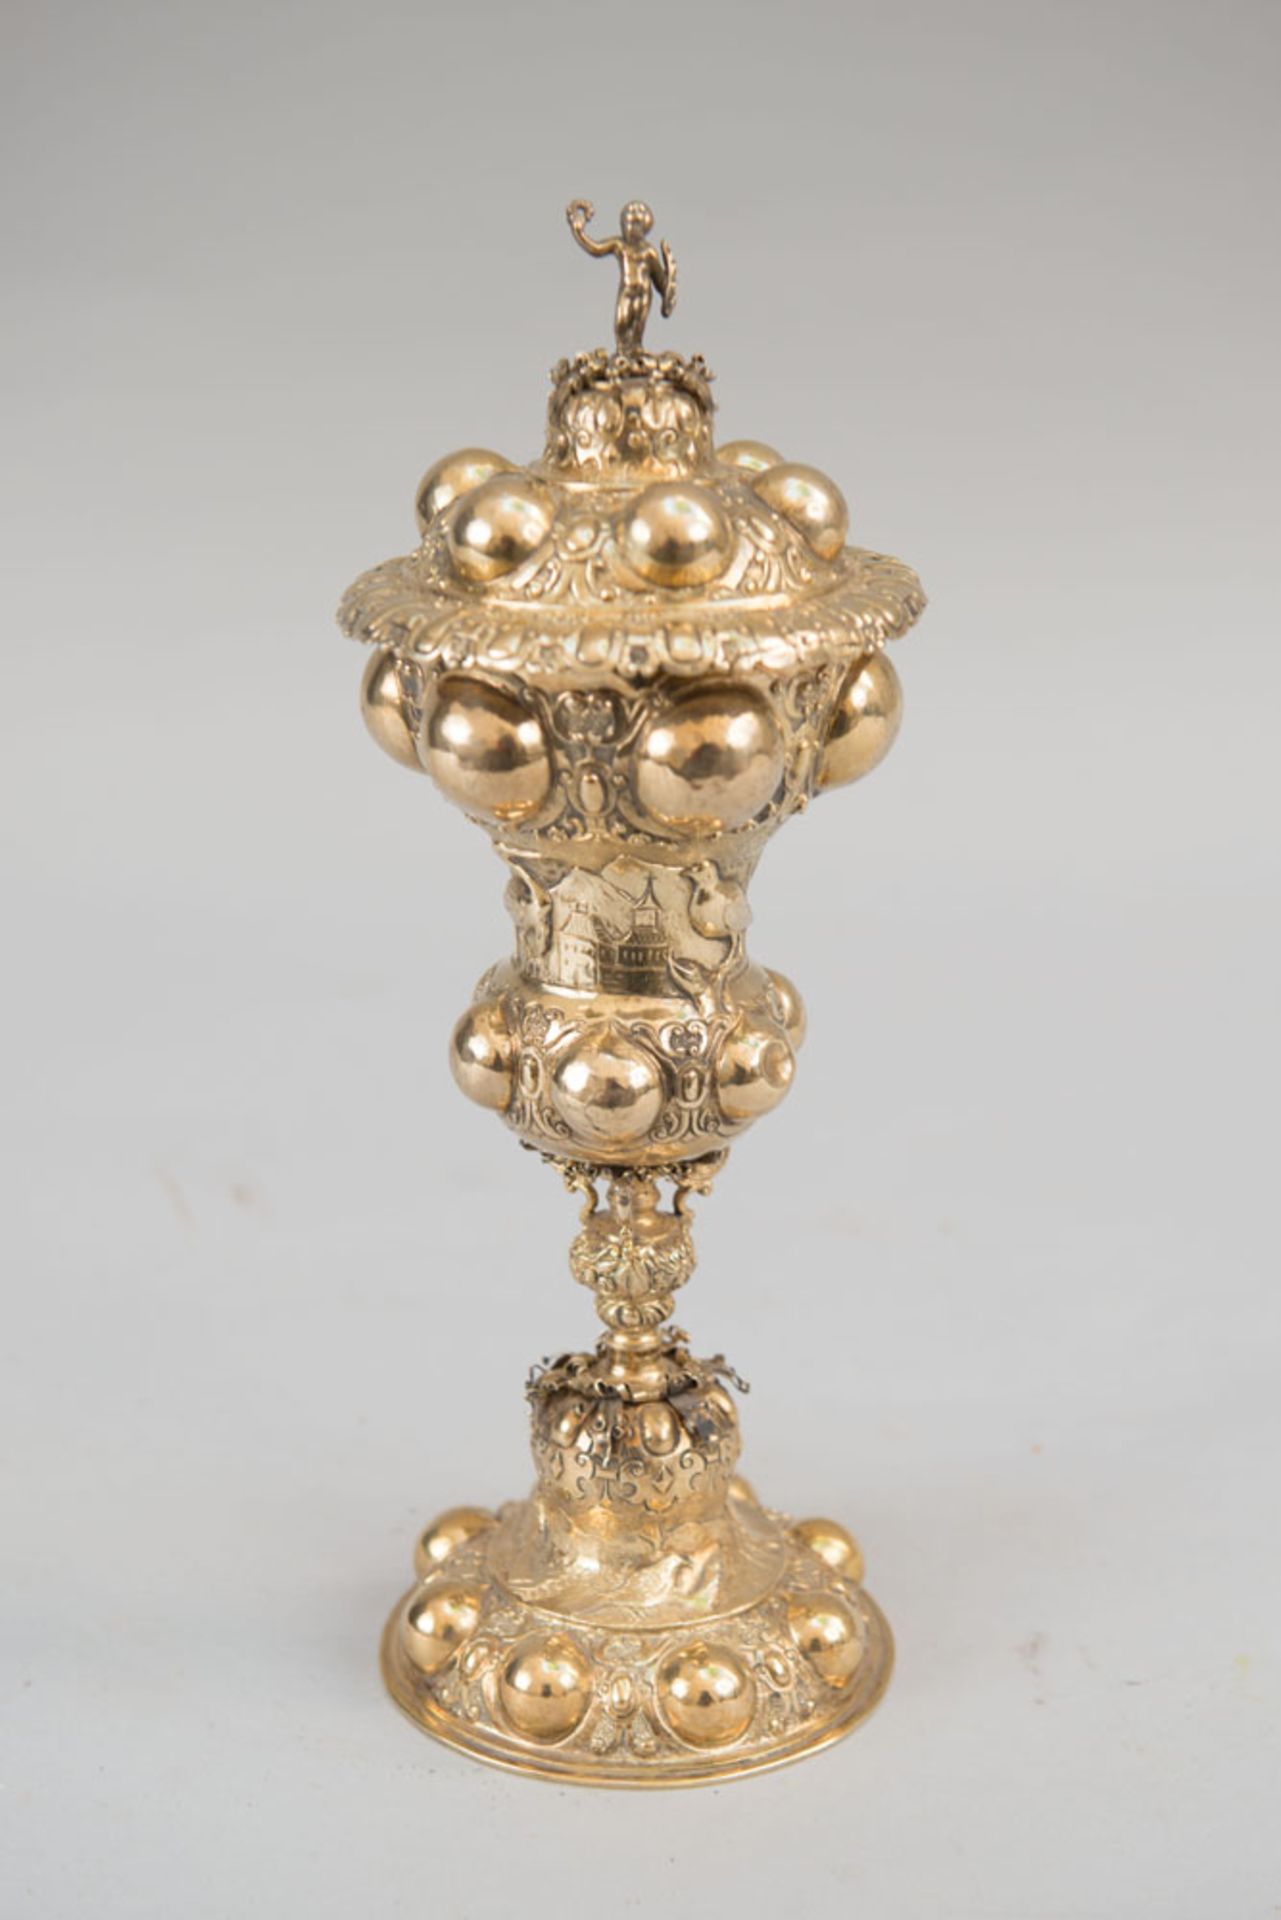 Augsburg Silver Akelei Goblet - Image 2 of 3